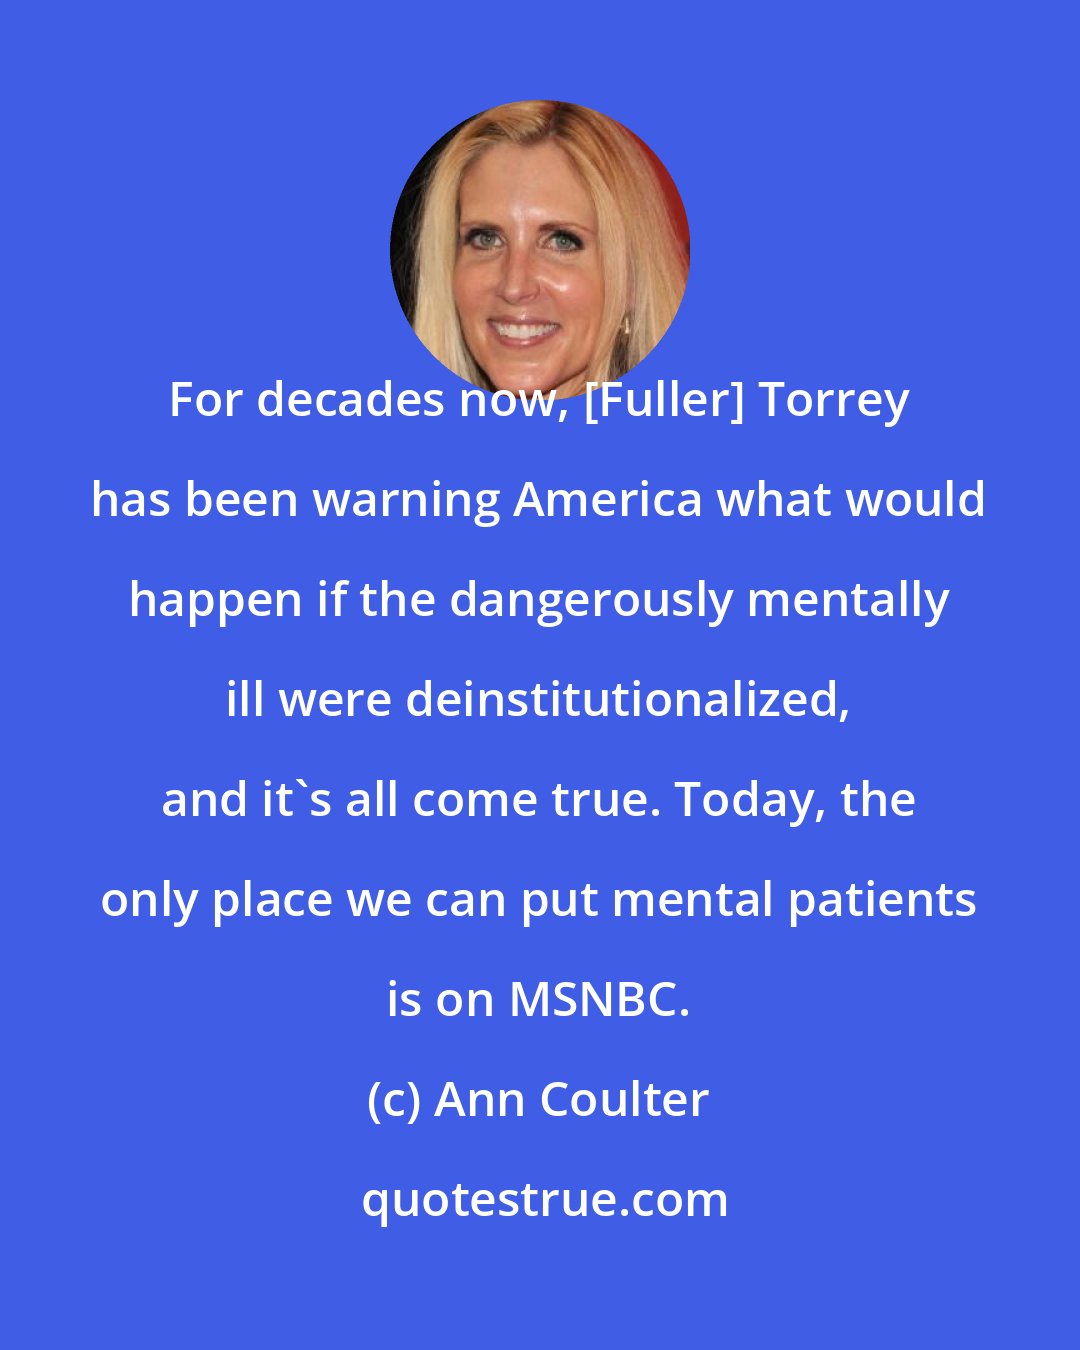 Ann Coulter: For decades now, [Fuller] Torrey has been warning America what would happen if the dangerously mentally ill were deinstitutionalized, and it's all come true. Today, the only place we can put mental patients is on MSNBC.